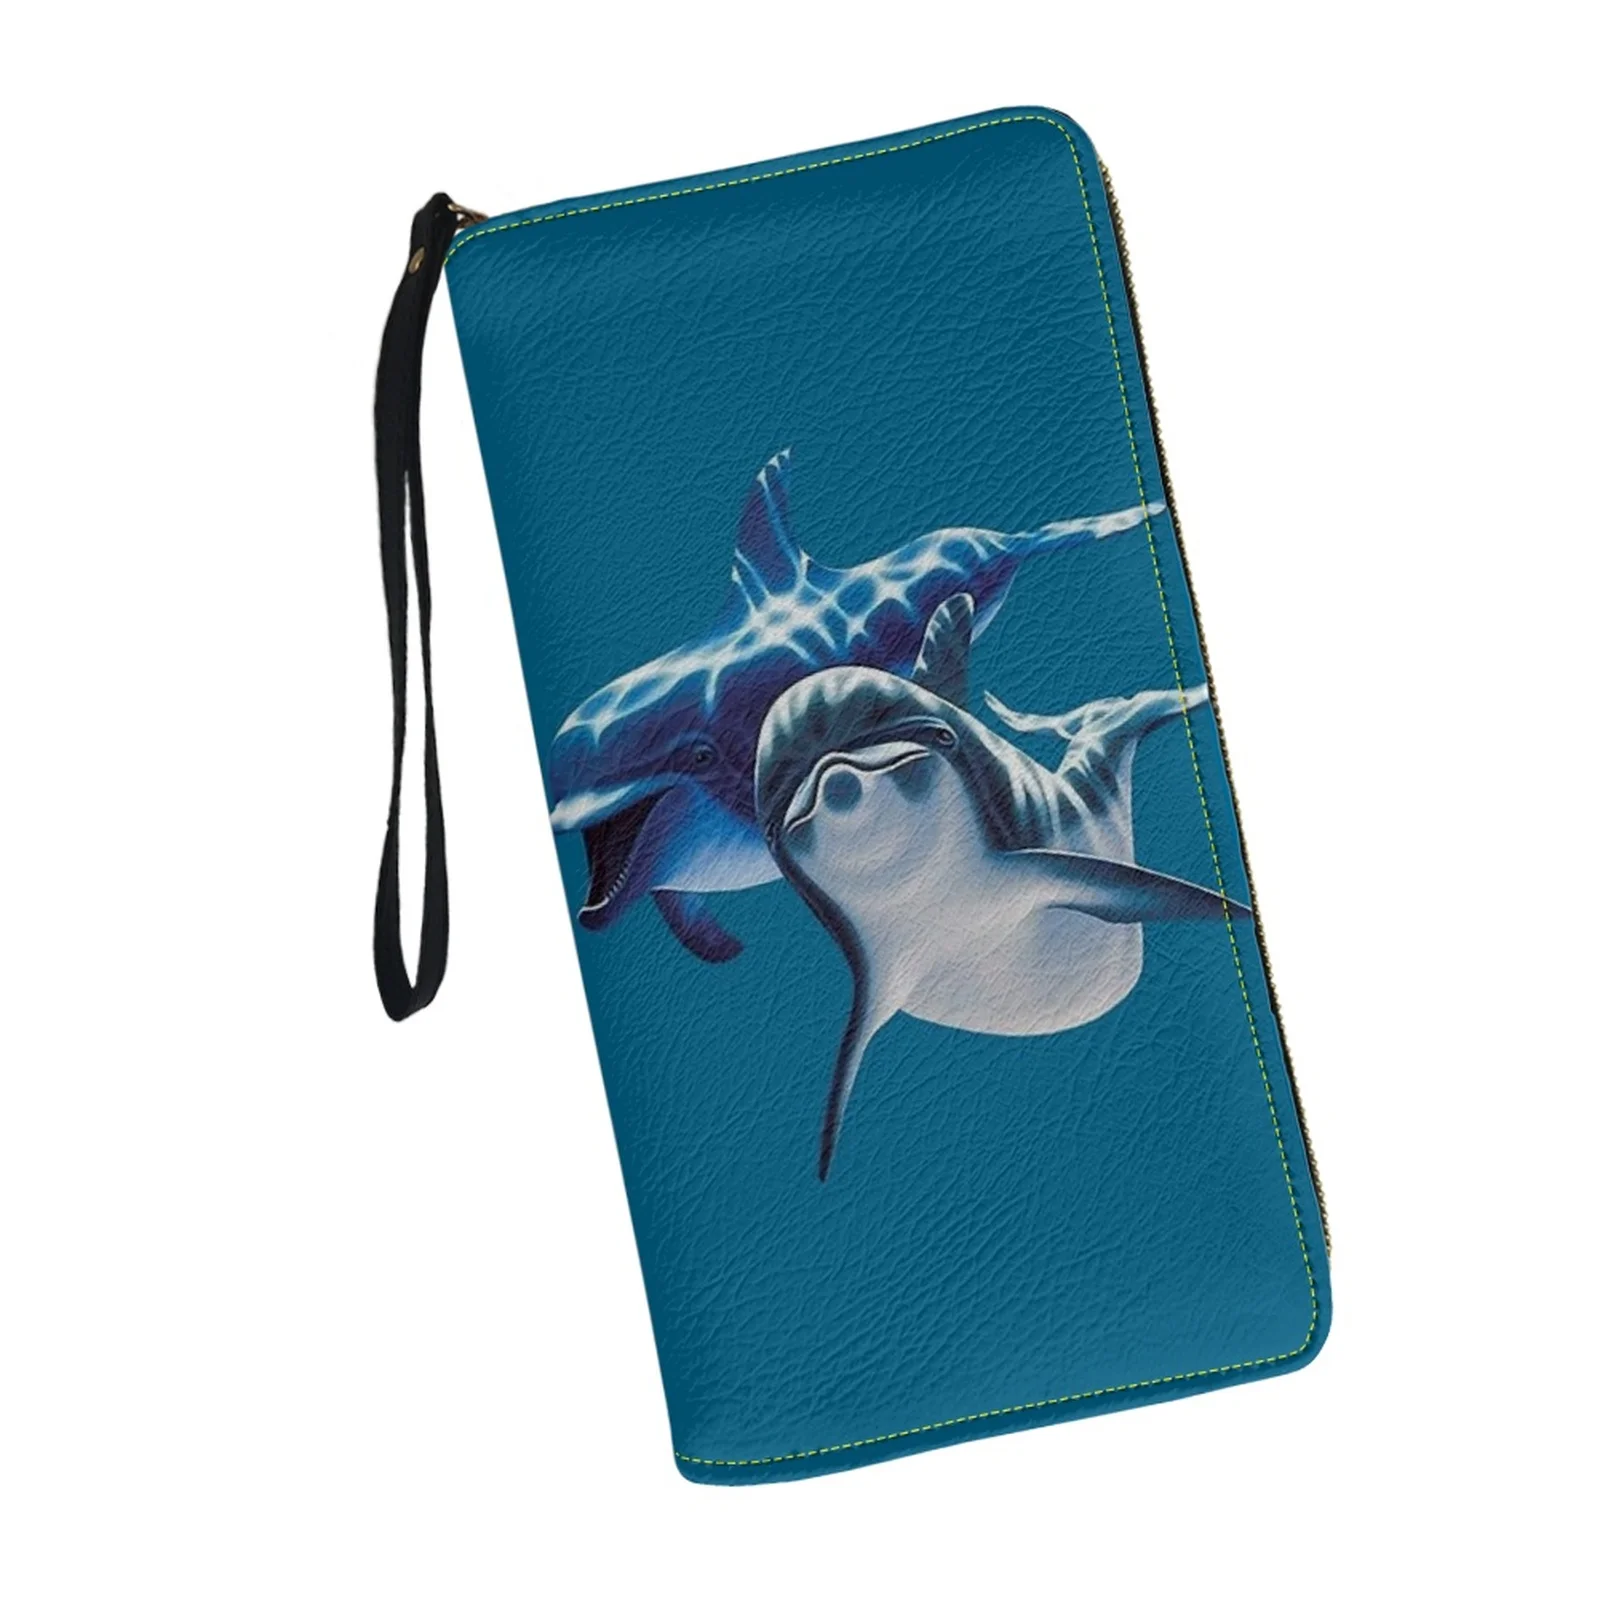 Belidome Animal Dolphins Wallets for Womens Around Zipper Long Purse RFID Blocking Card Holder Clutch Bag Wristlet Wallet